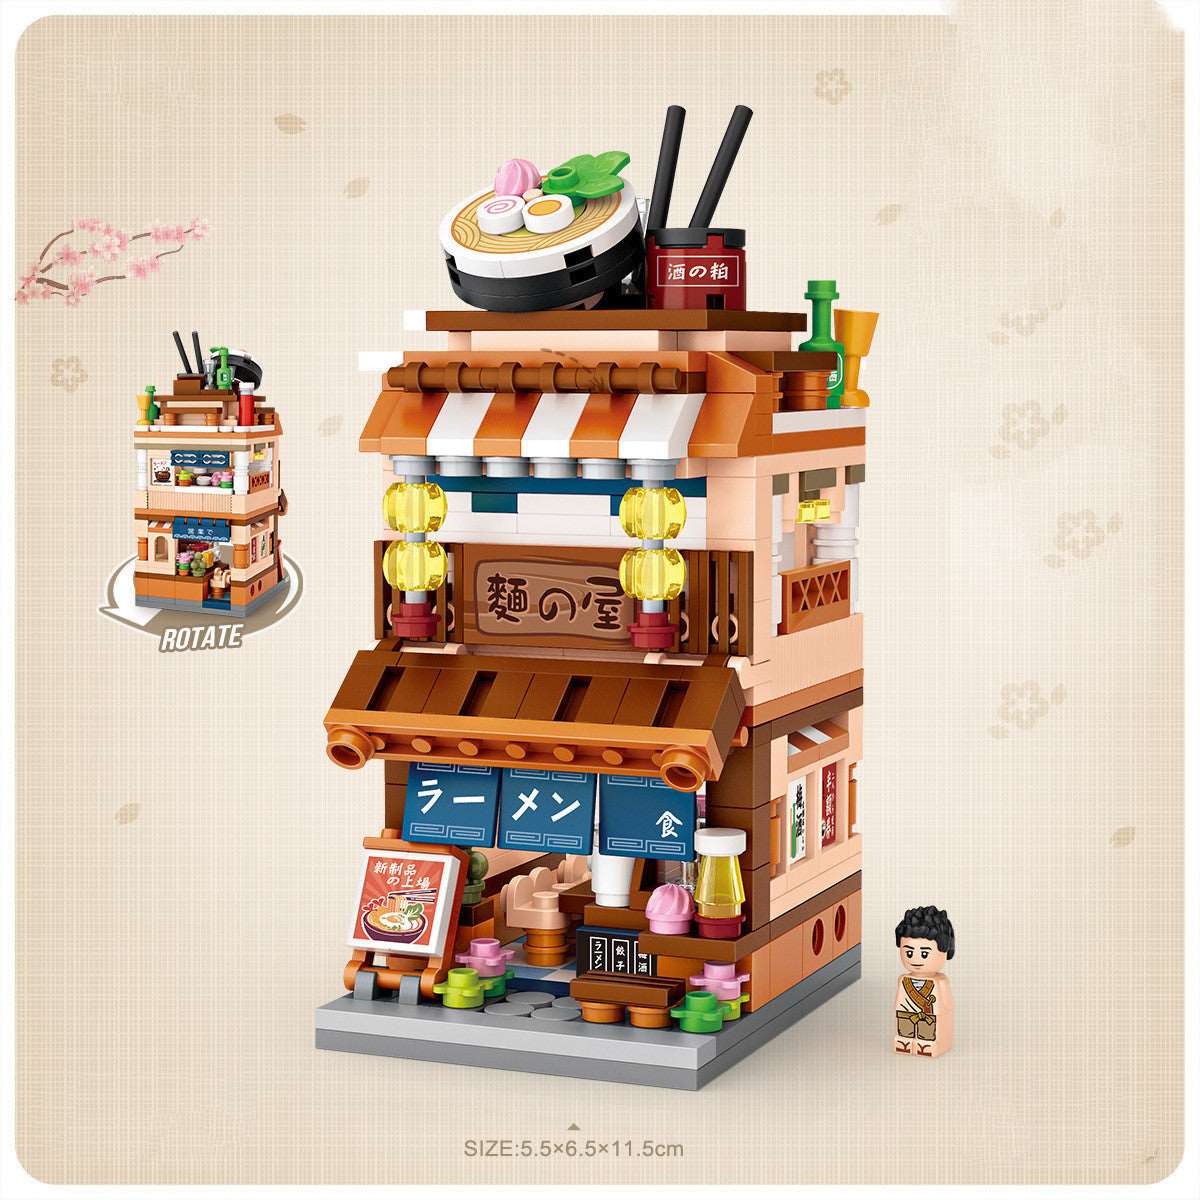 LOZ1653 Hot Spring House New Product Street View Small Particle Building Blocks Mini Children's Toy Building Block Toy Company Gift Wakaii